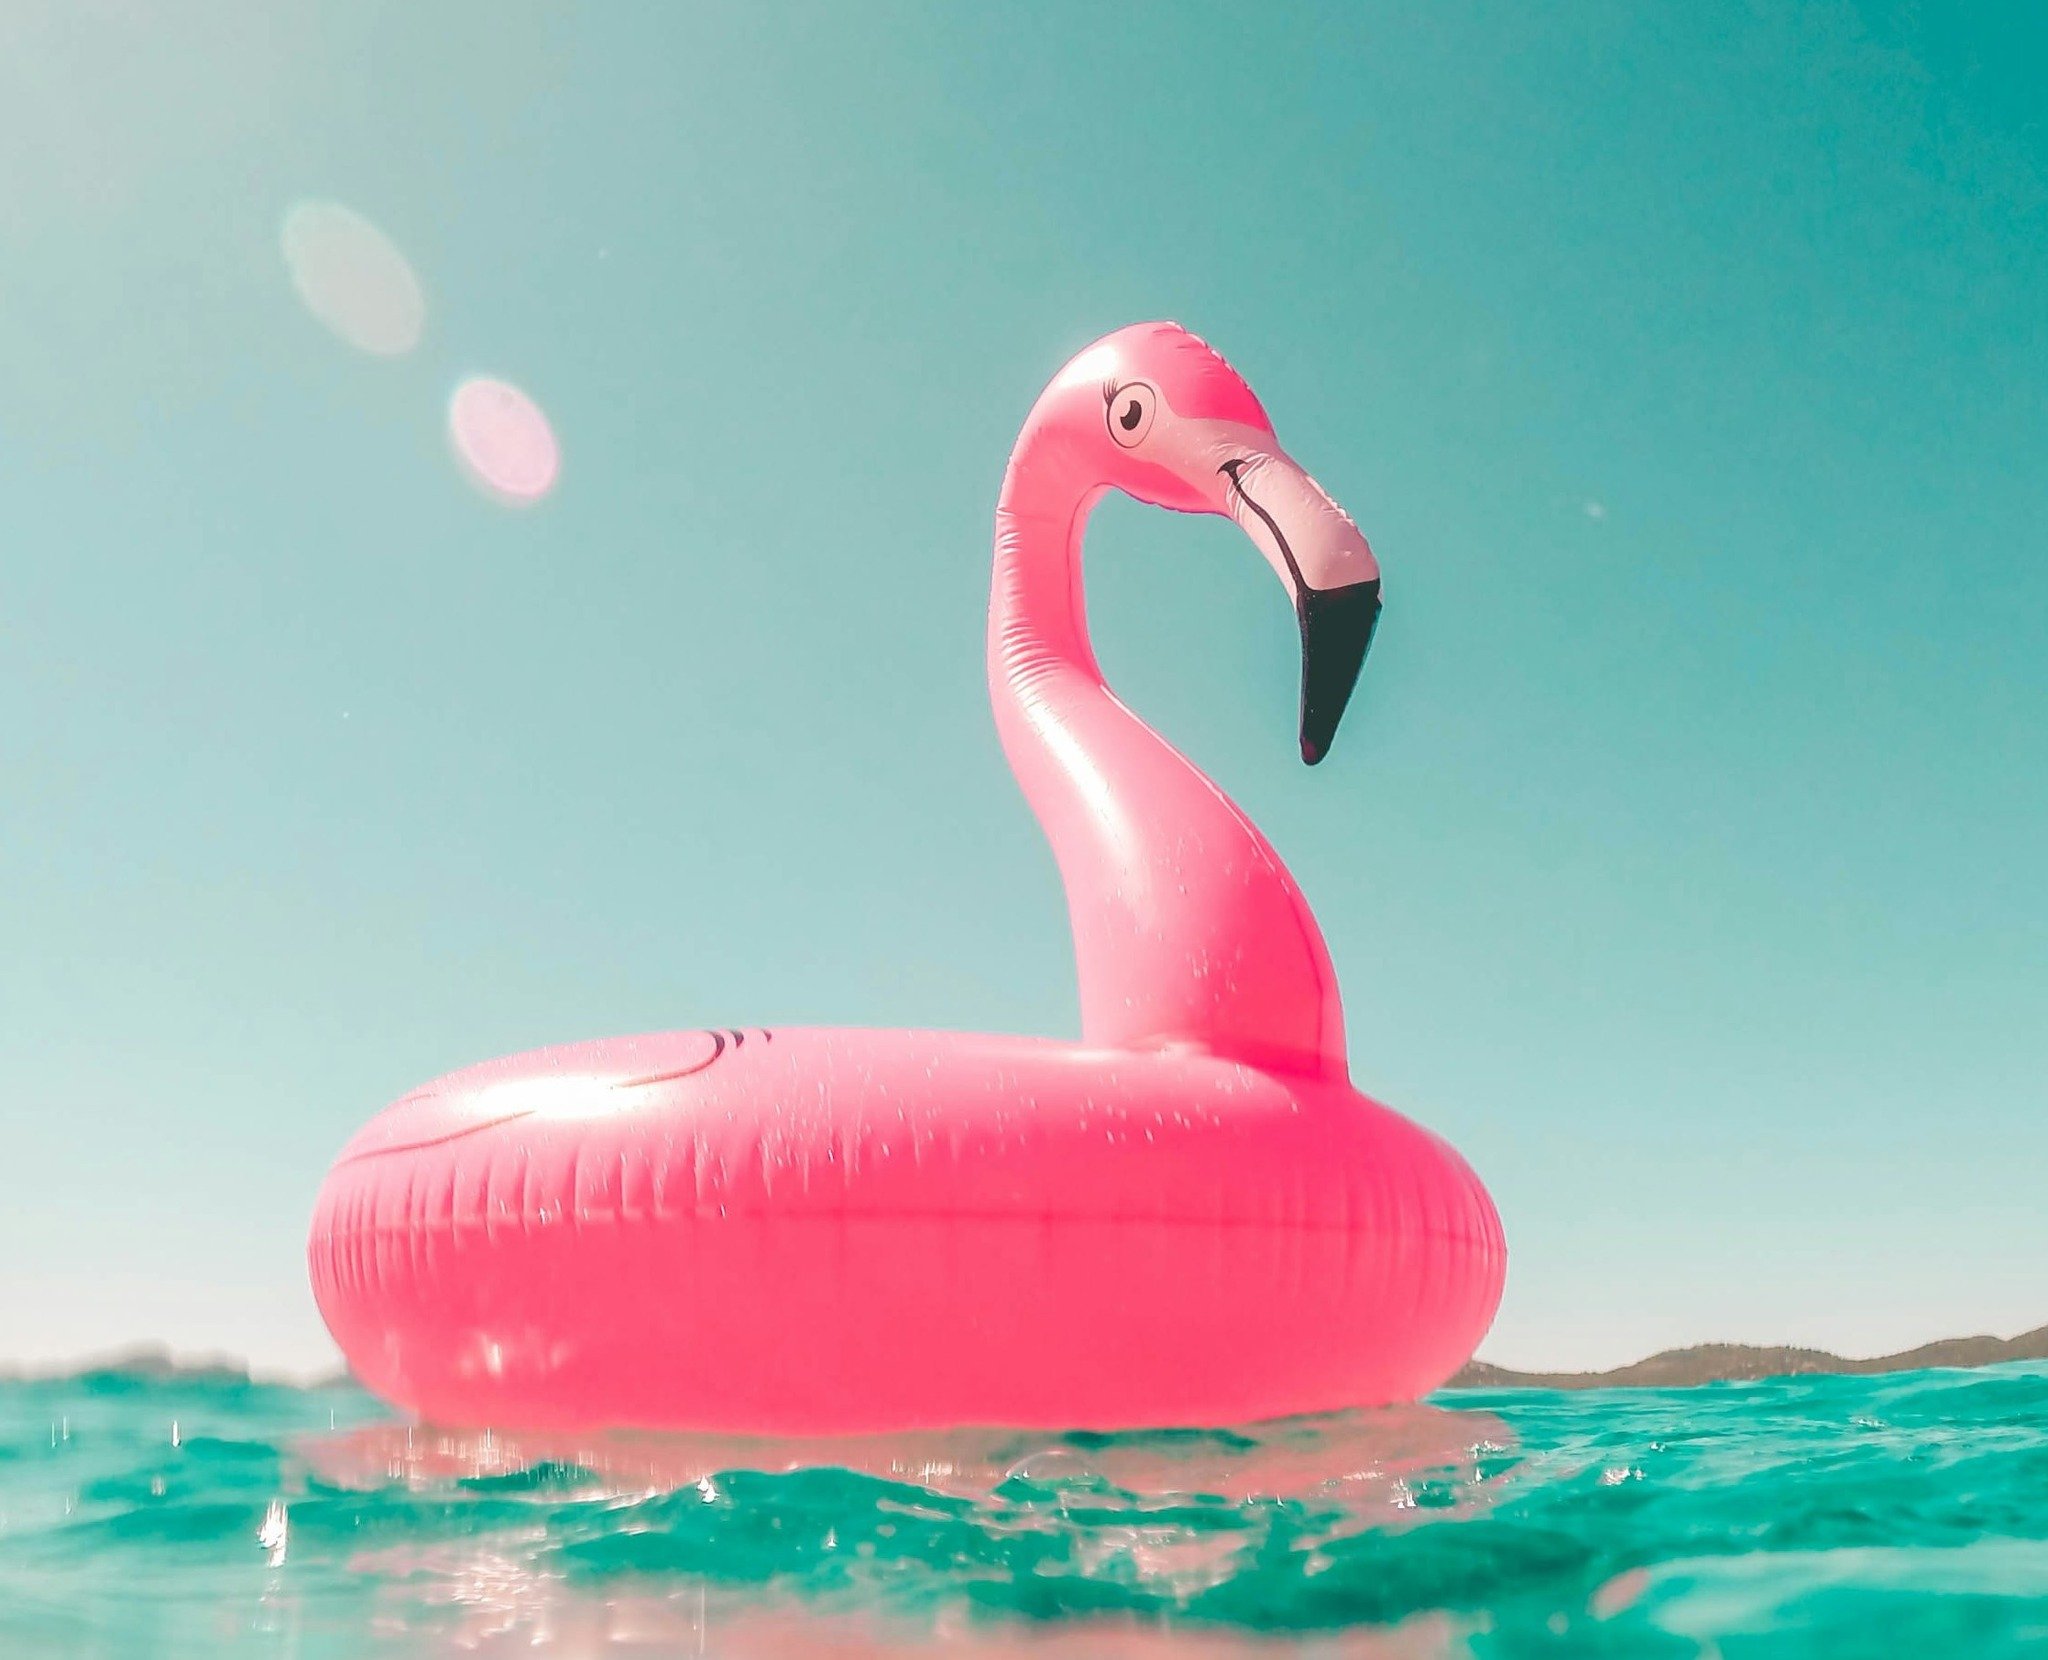 Summertime means vacations, sunshine...and potentially a staffing scramble! 

Ensuring smooth operations while team members take well-deserved breaks can be a challenge. Here's how to manage summer cover like a beach boss and keep your business afloa